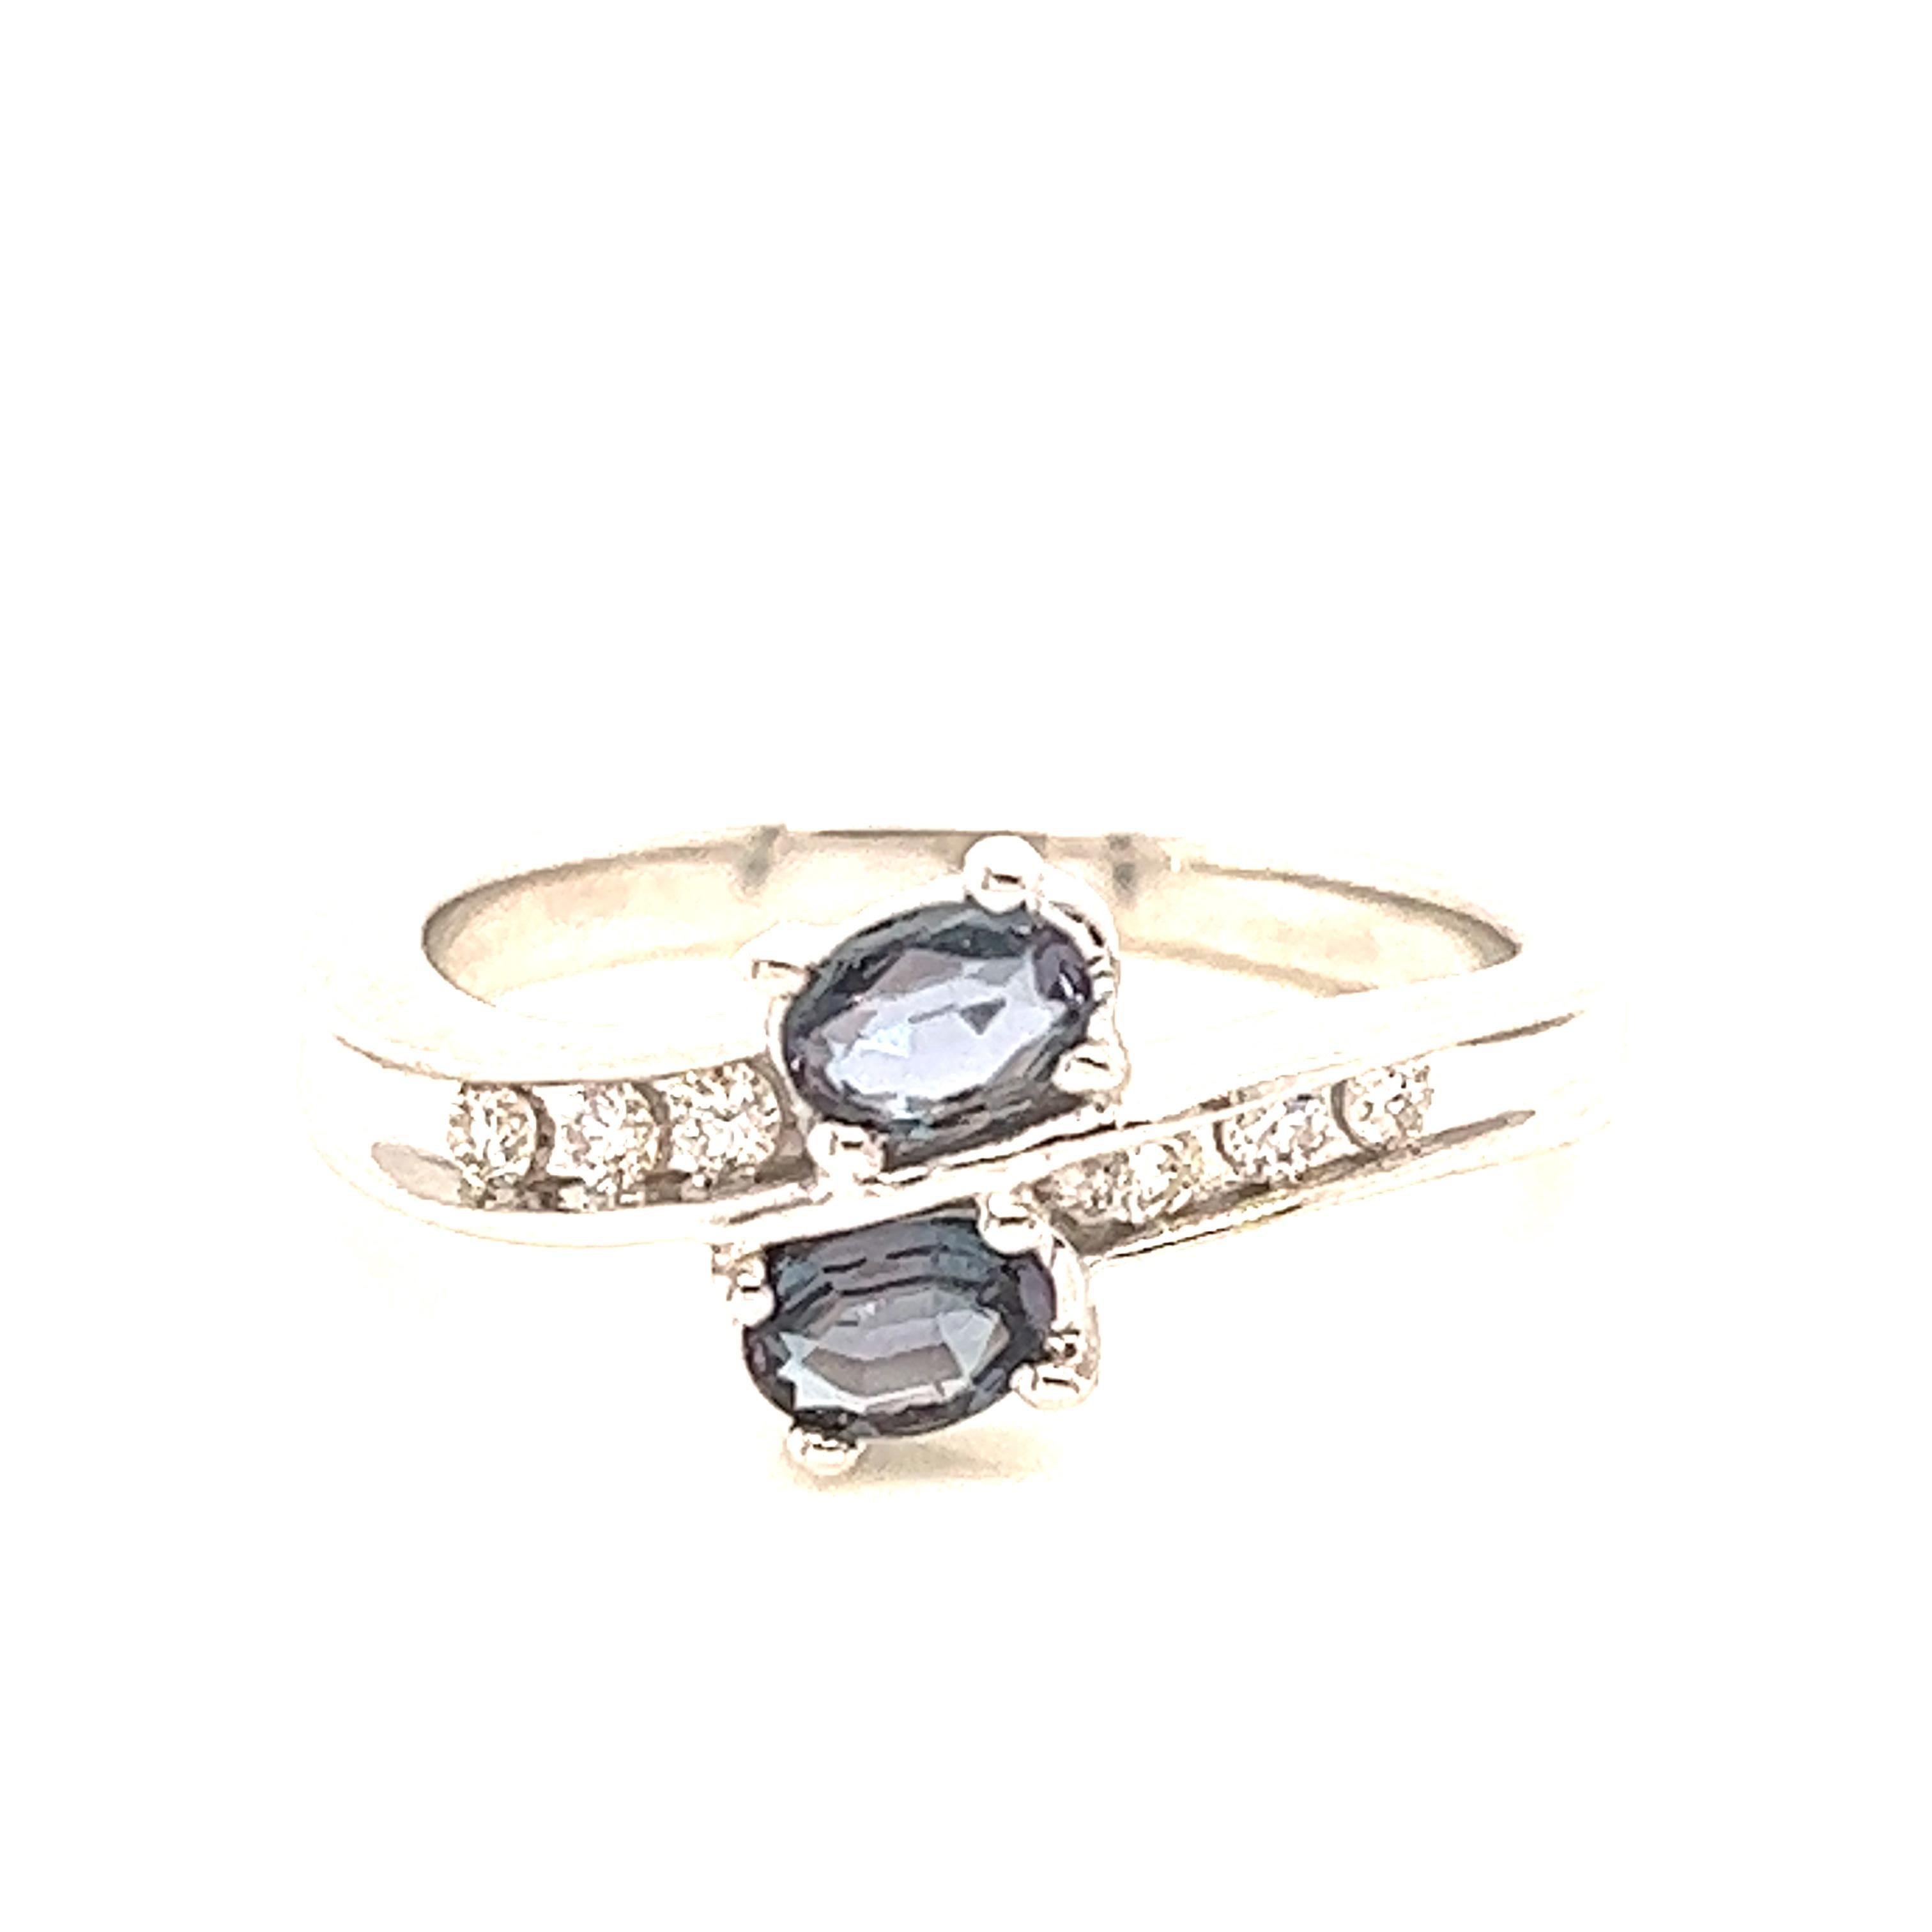 This is a gorgeous natural AAA quality oval Alexandrite surrounded by dainty diamonds that is set in a vintage white gold setting. This ring features a natural 0.35 oval alexandrite that is surrounded by brilliant white diamonds. The ring is a true